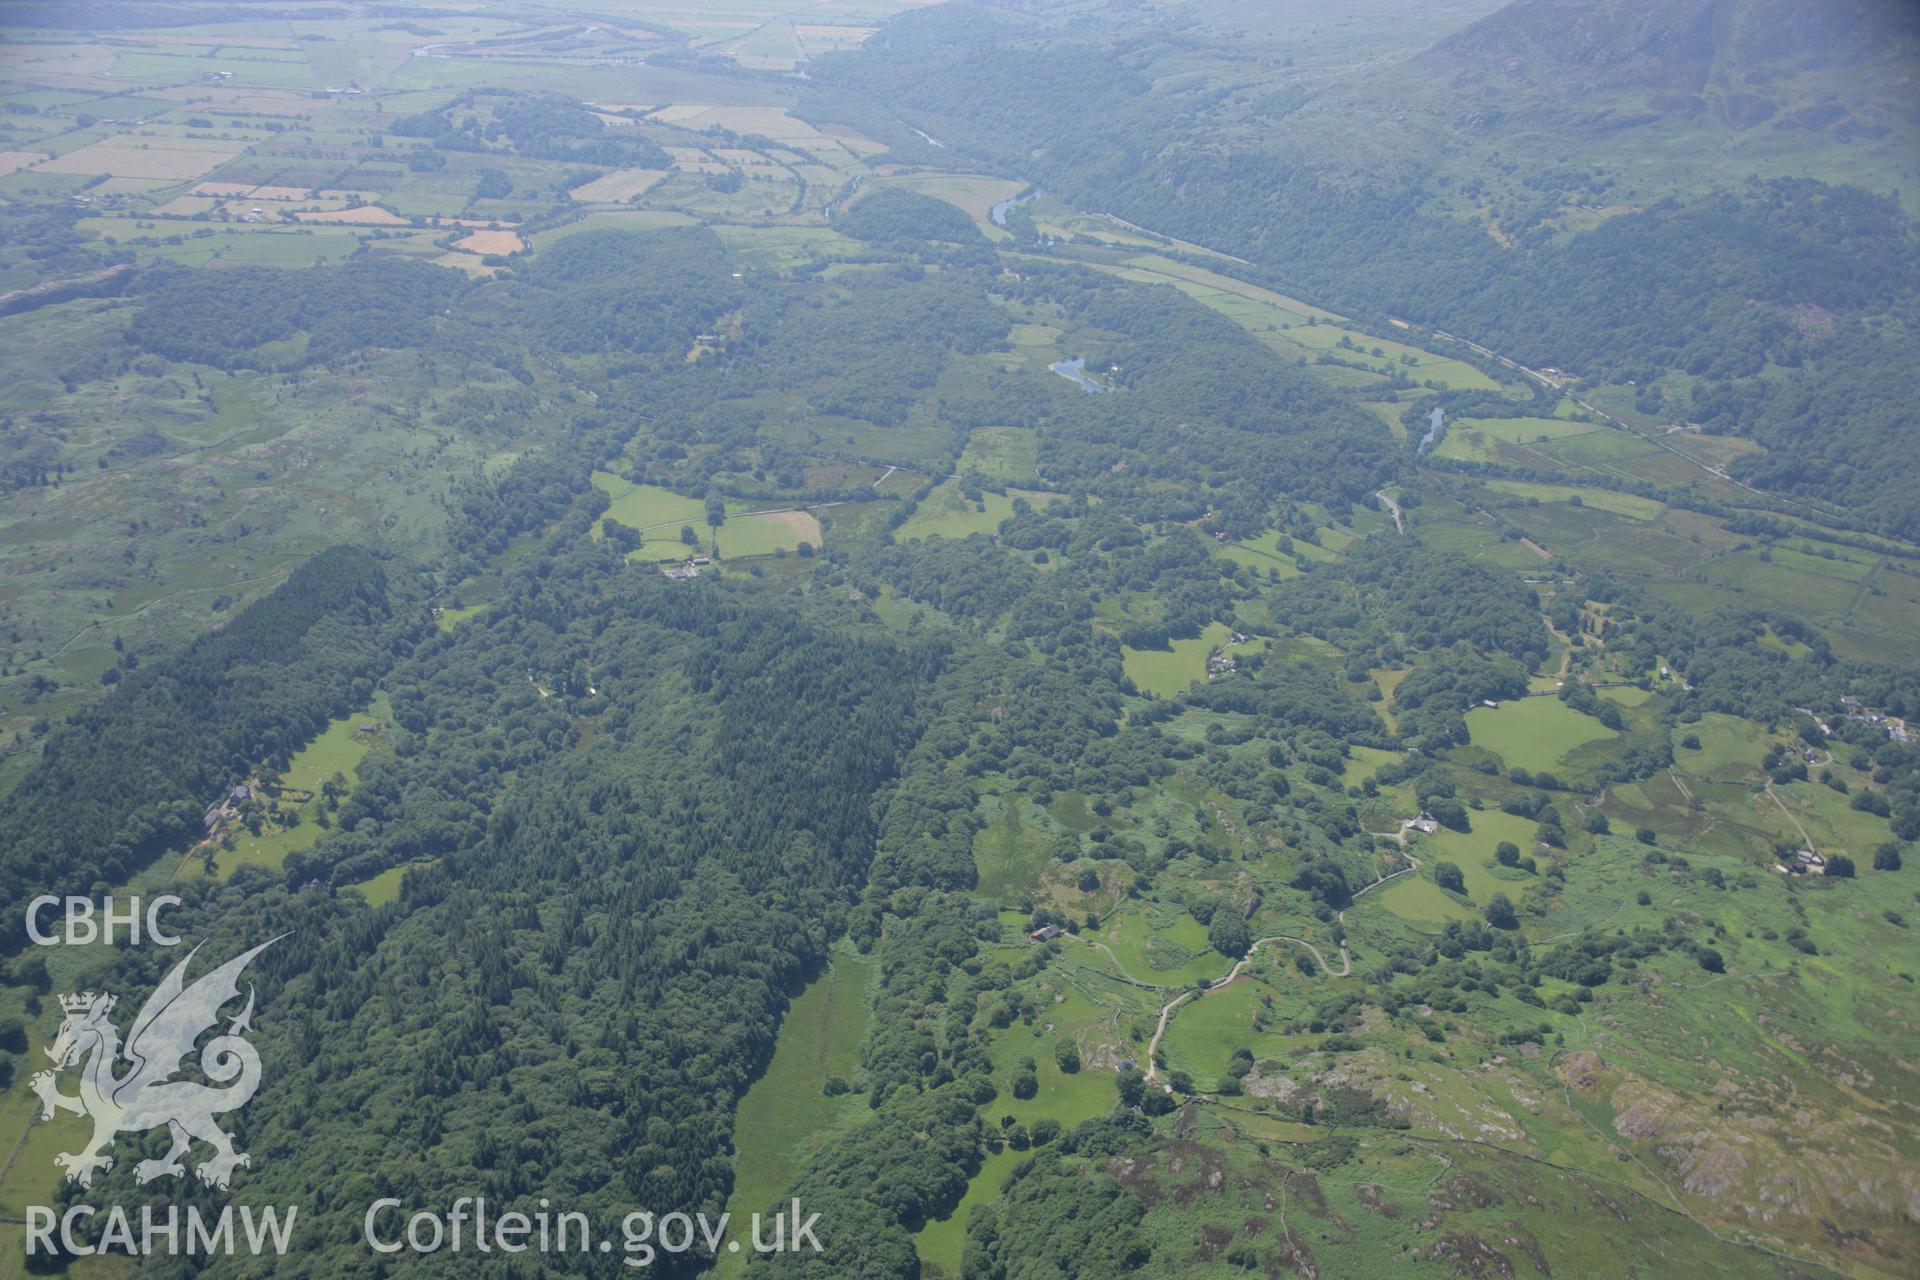 RCAHMW colour oblique aerial photograph of Afon Glaslyn landscape Taken on 18 July 2006 by Toby Driver.